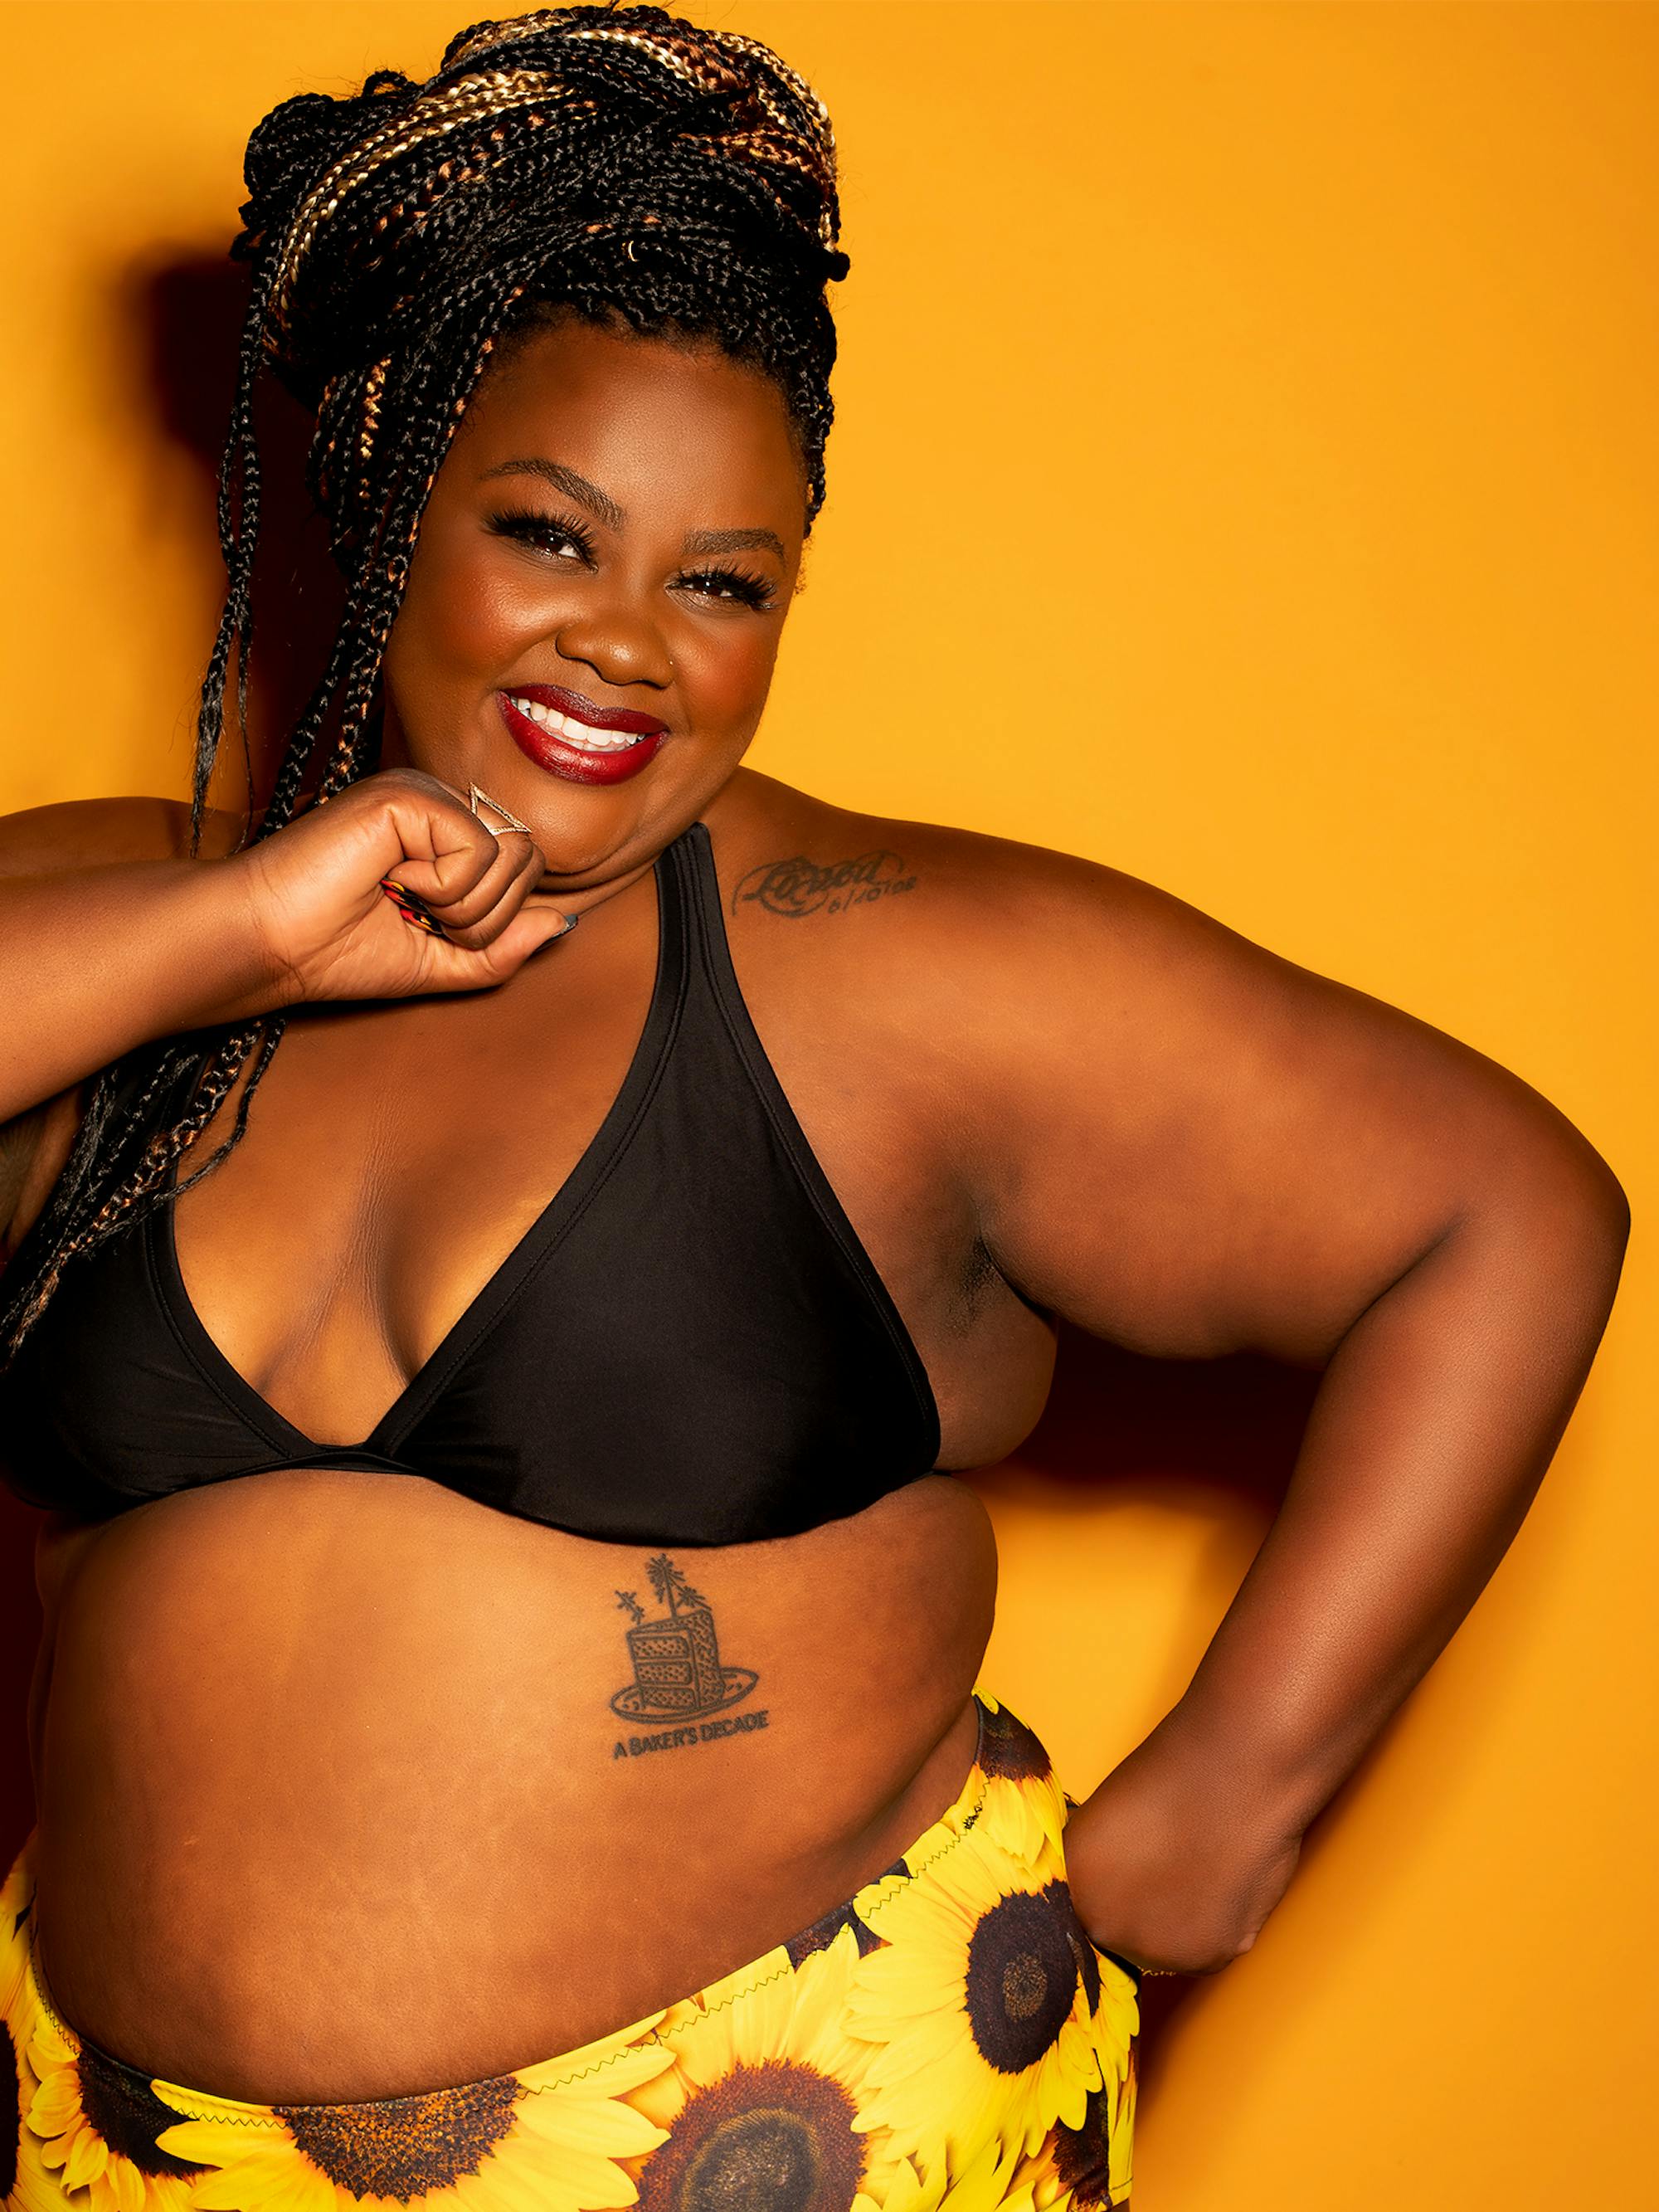 Nicole Byer poses in front of an orange yellow wall, wearing a bikini with sunflower print, smiling directly at the camera.